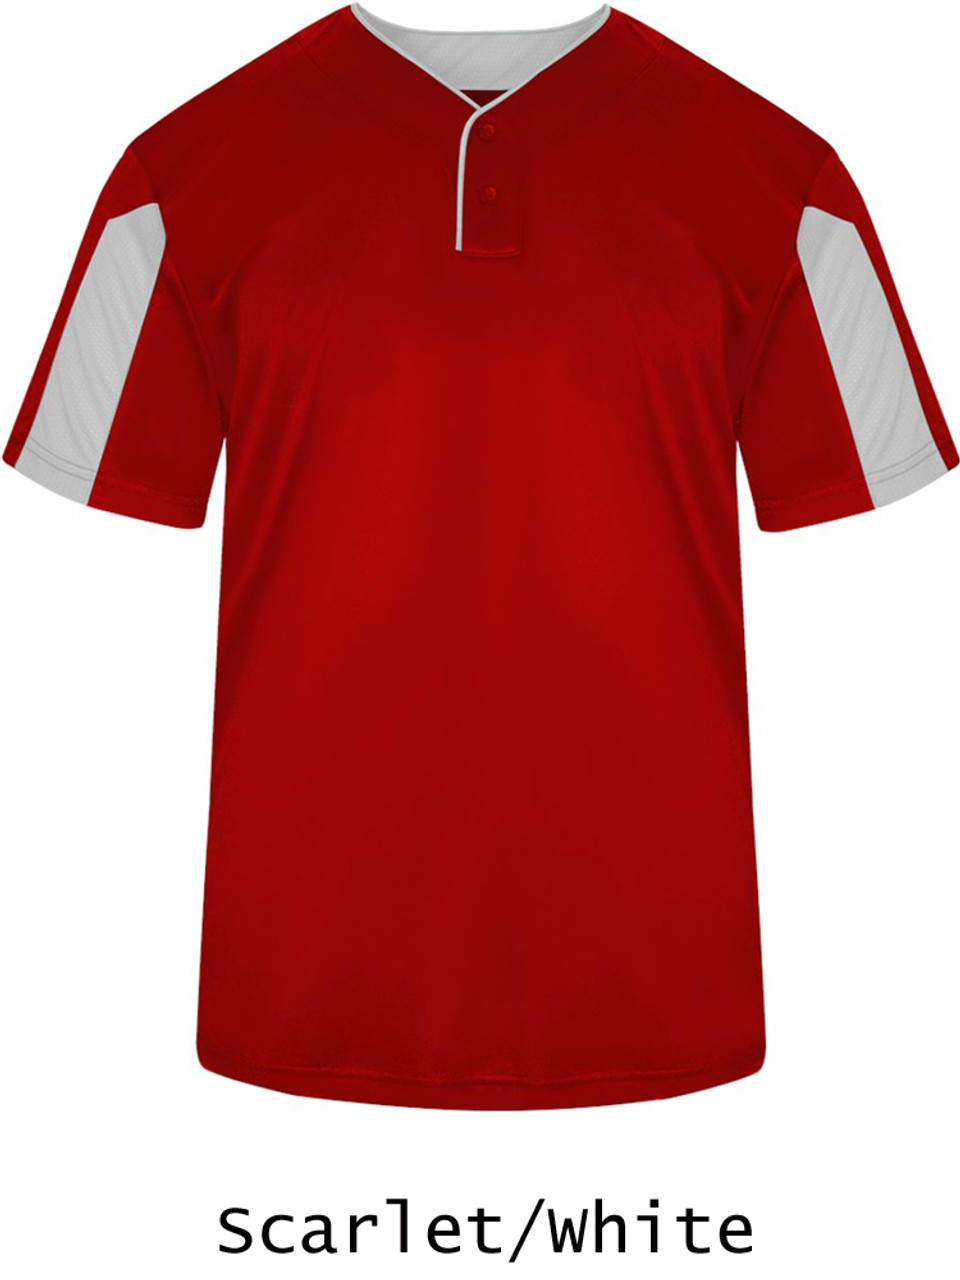 Paragon Softball Jersey Package - Youth & Adult